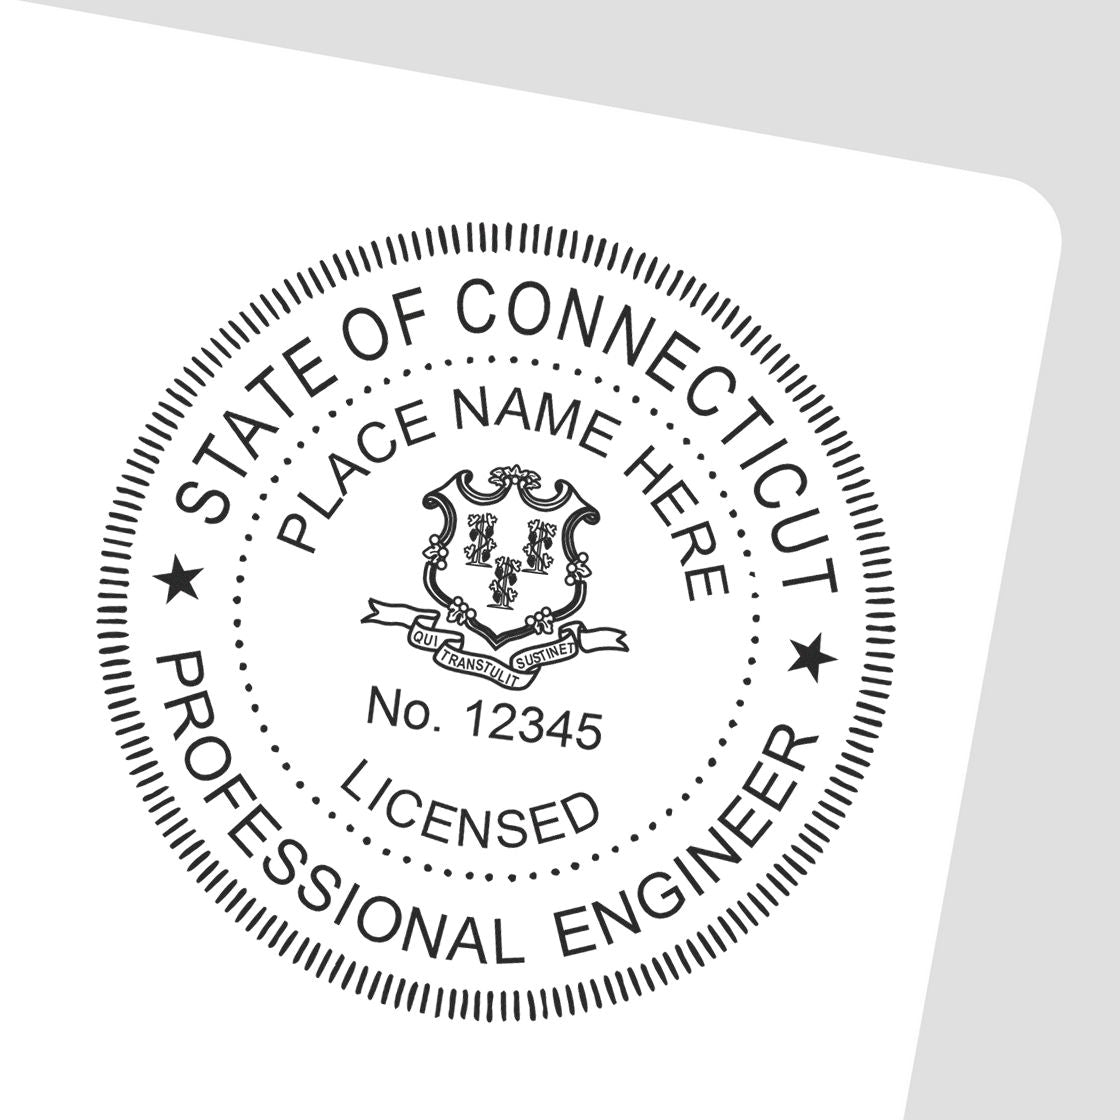 The main image for the Self-Inking Connecticut PE Stamp depicting a sample of the imprint and electronic files